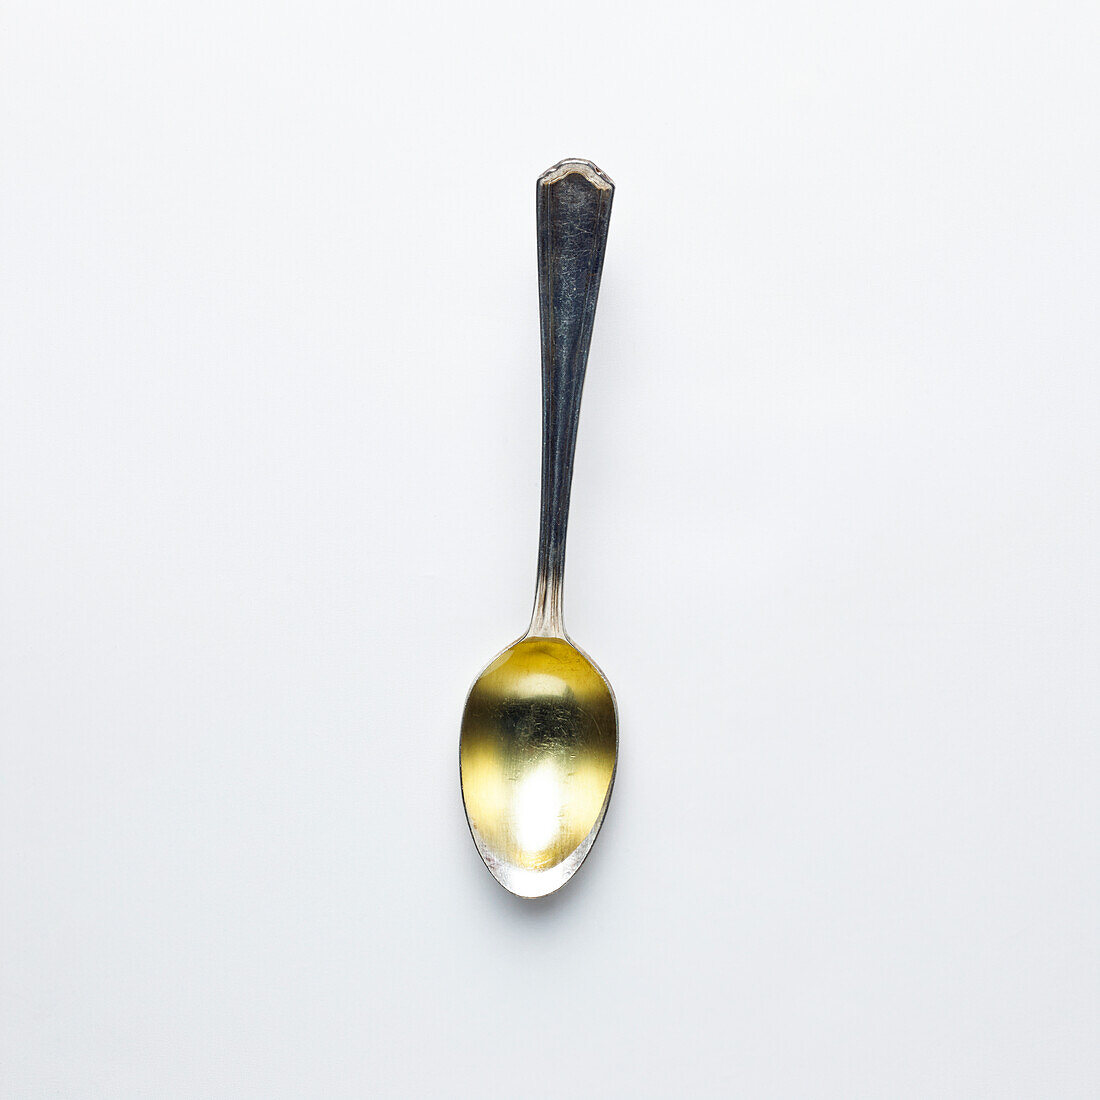 Spoonful of almond extract